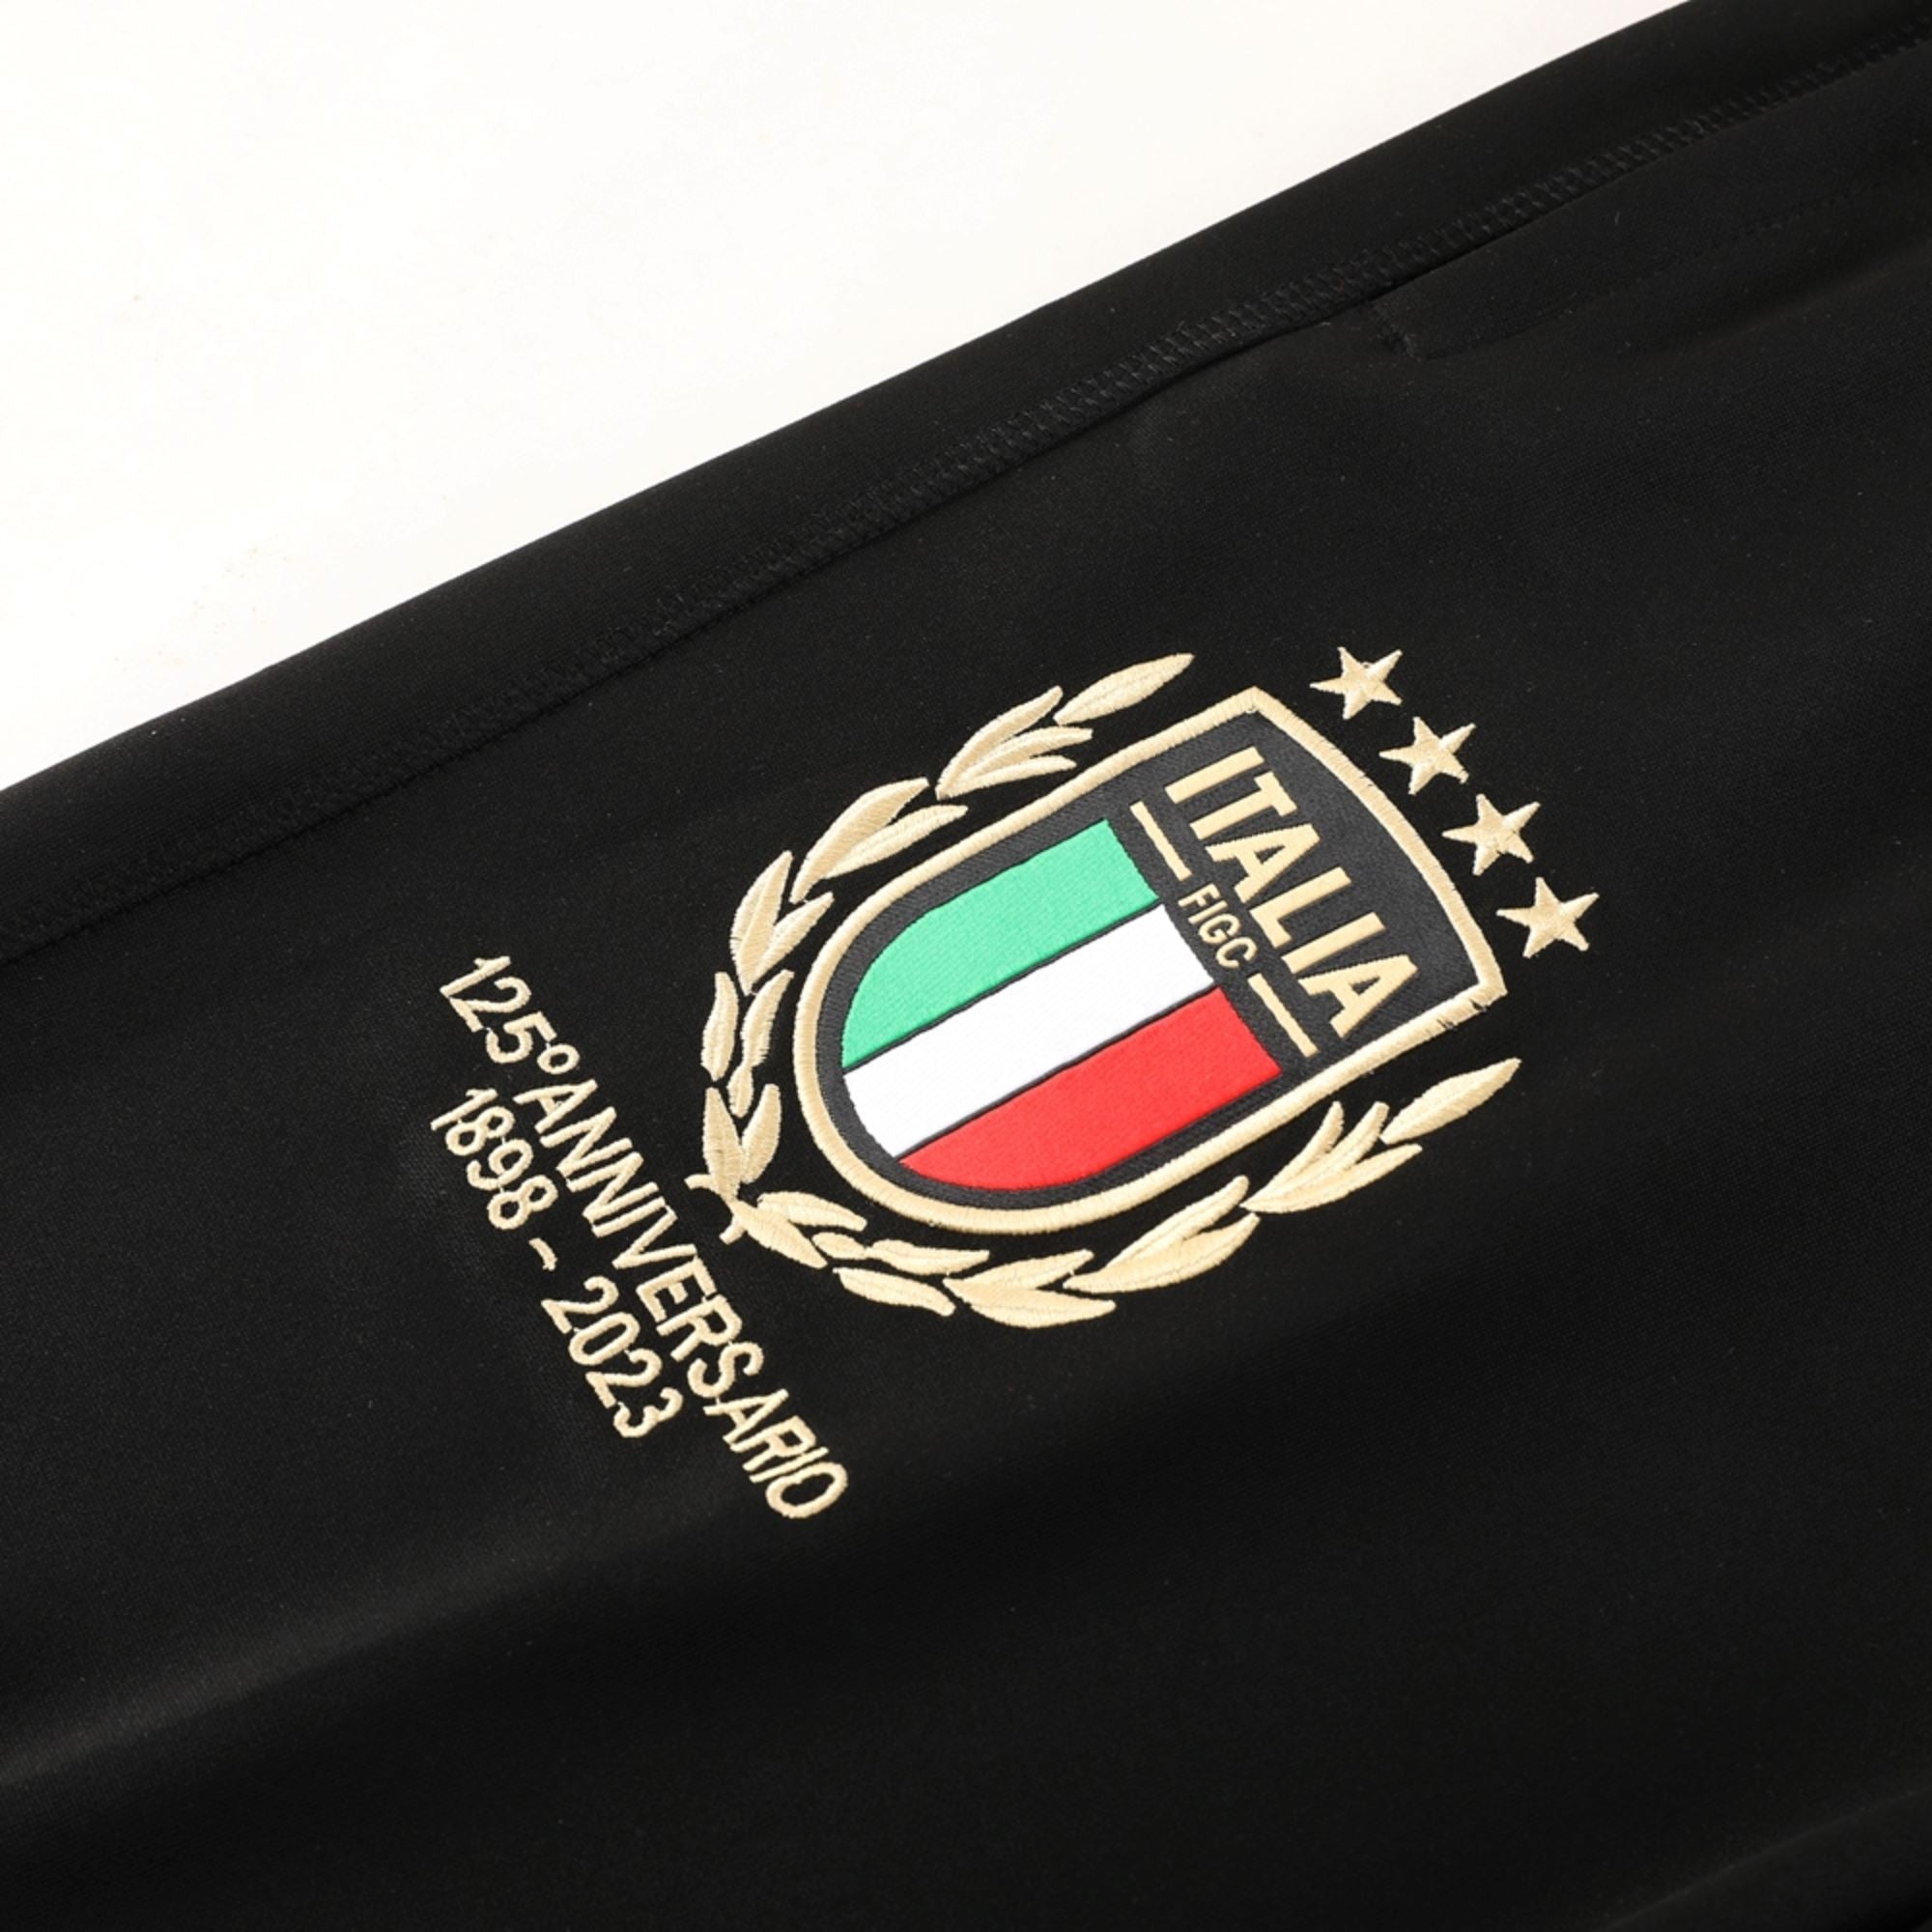 Italy 125th Anniversary Special Edition Tracksuit - ADIDAS